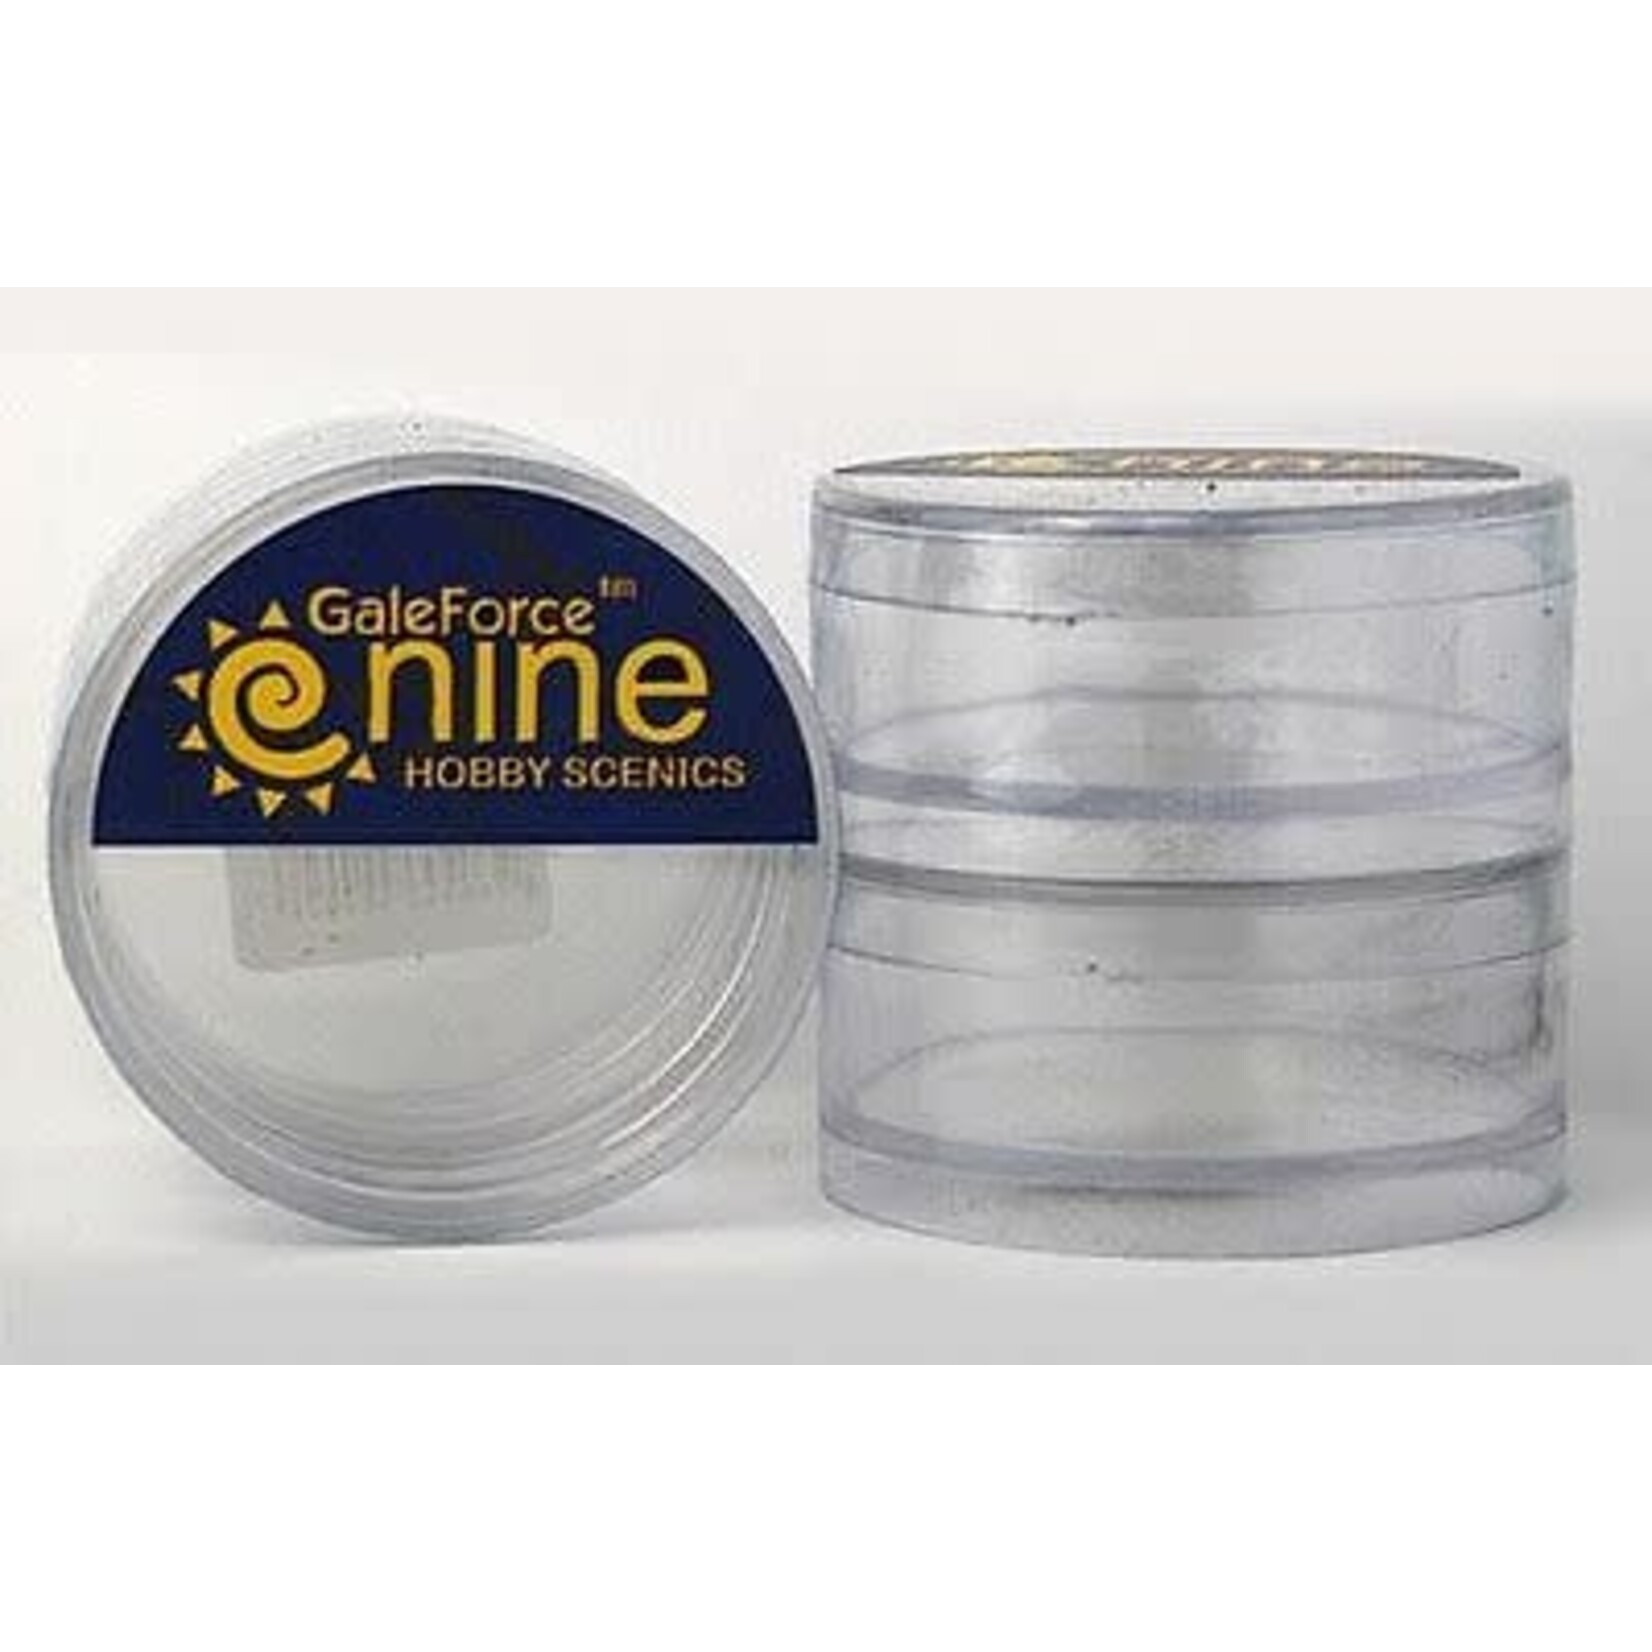 Gale Force Nine Empty Hobby Rounds (2pack)